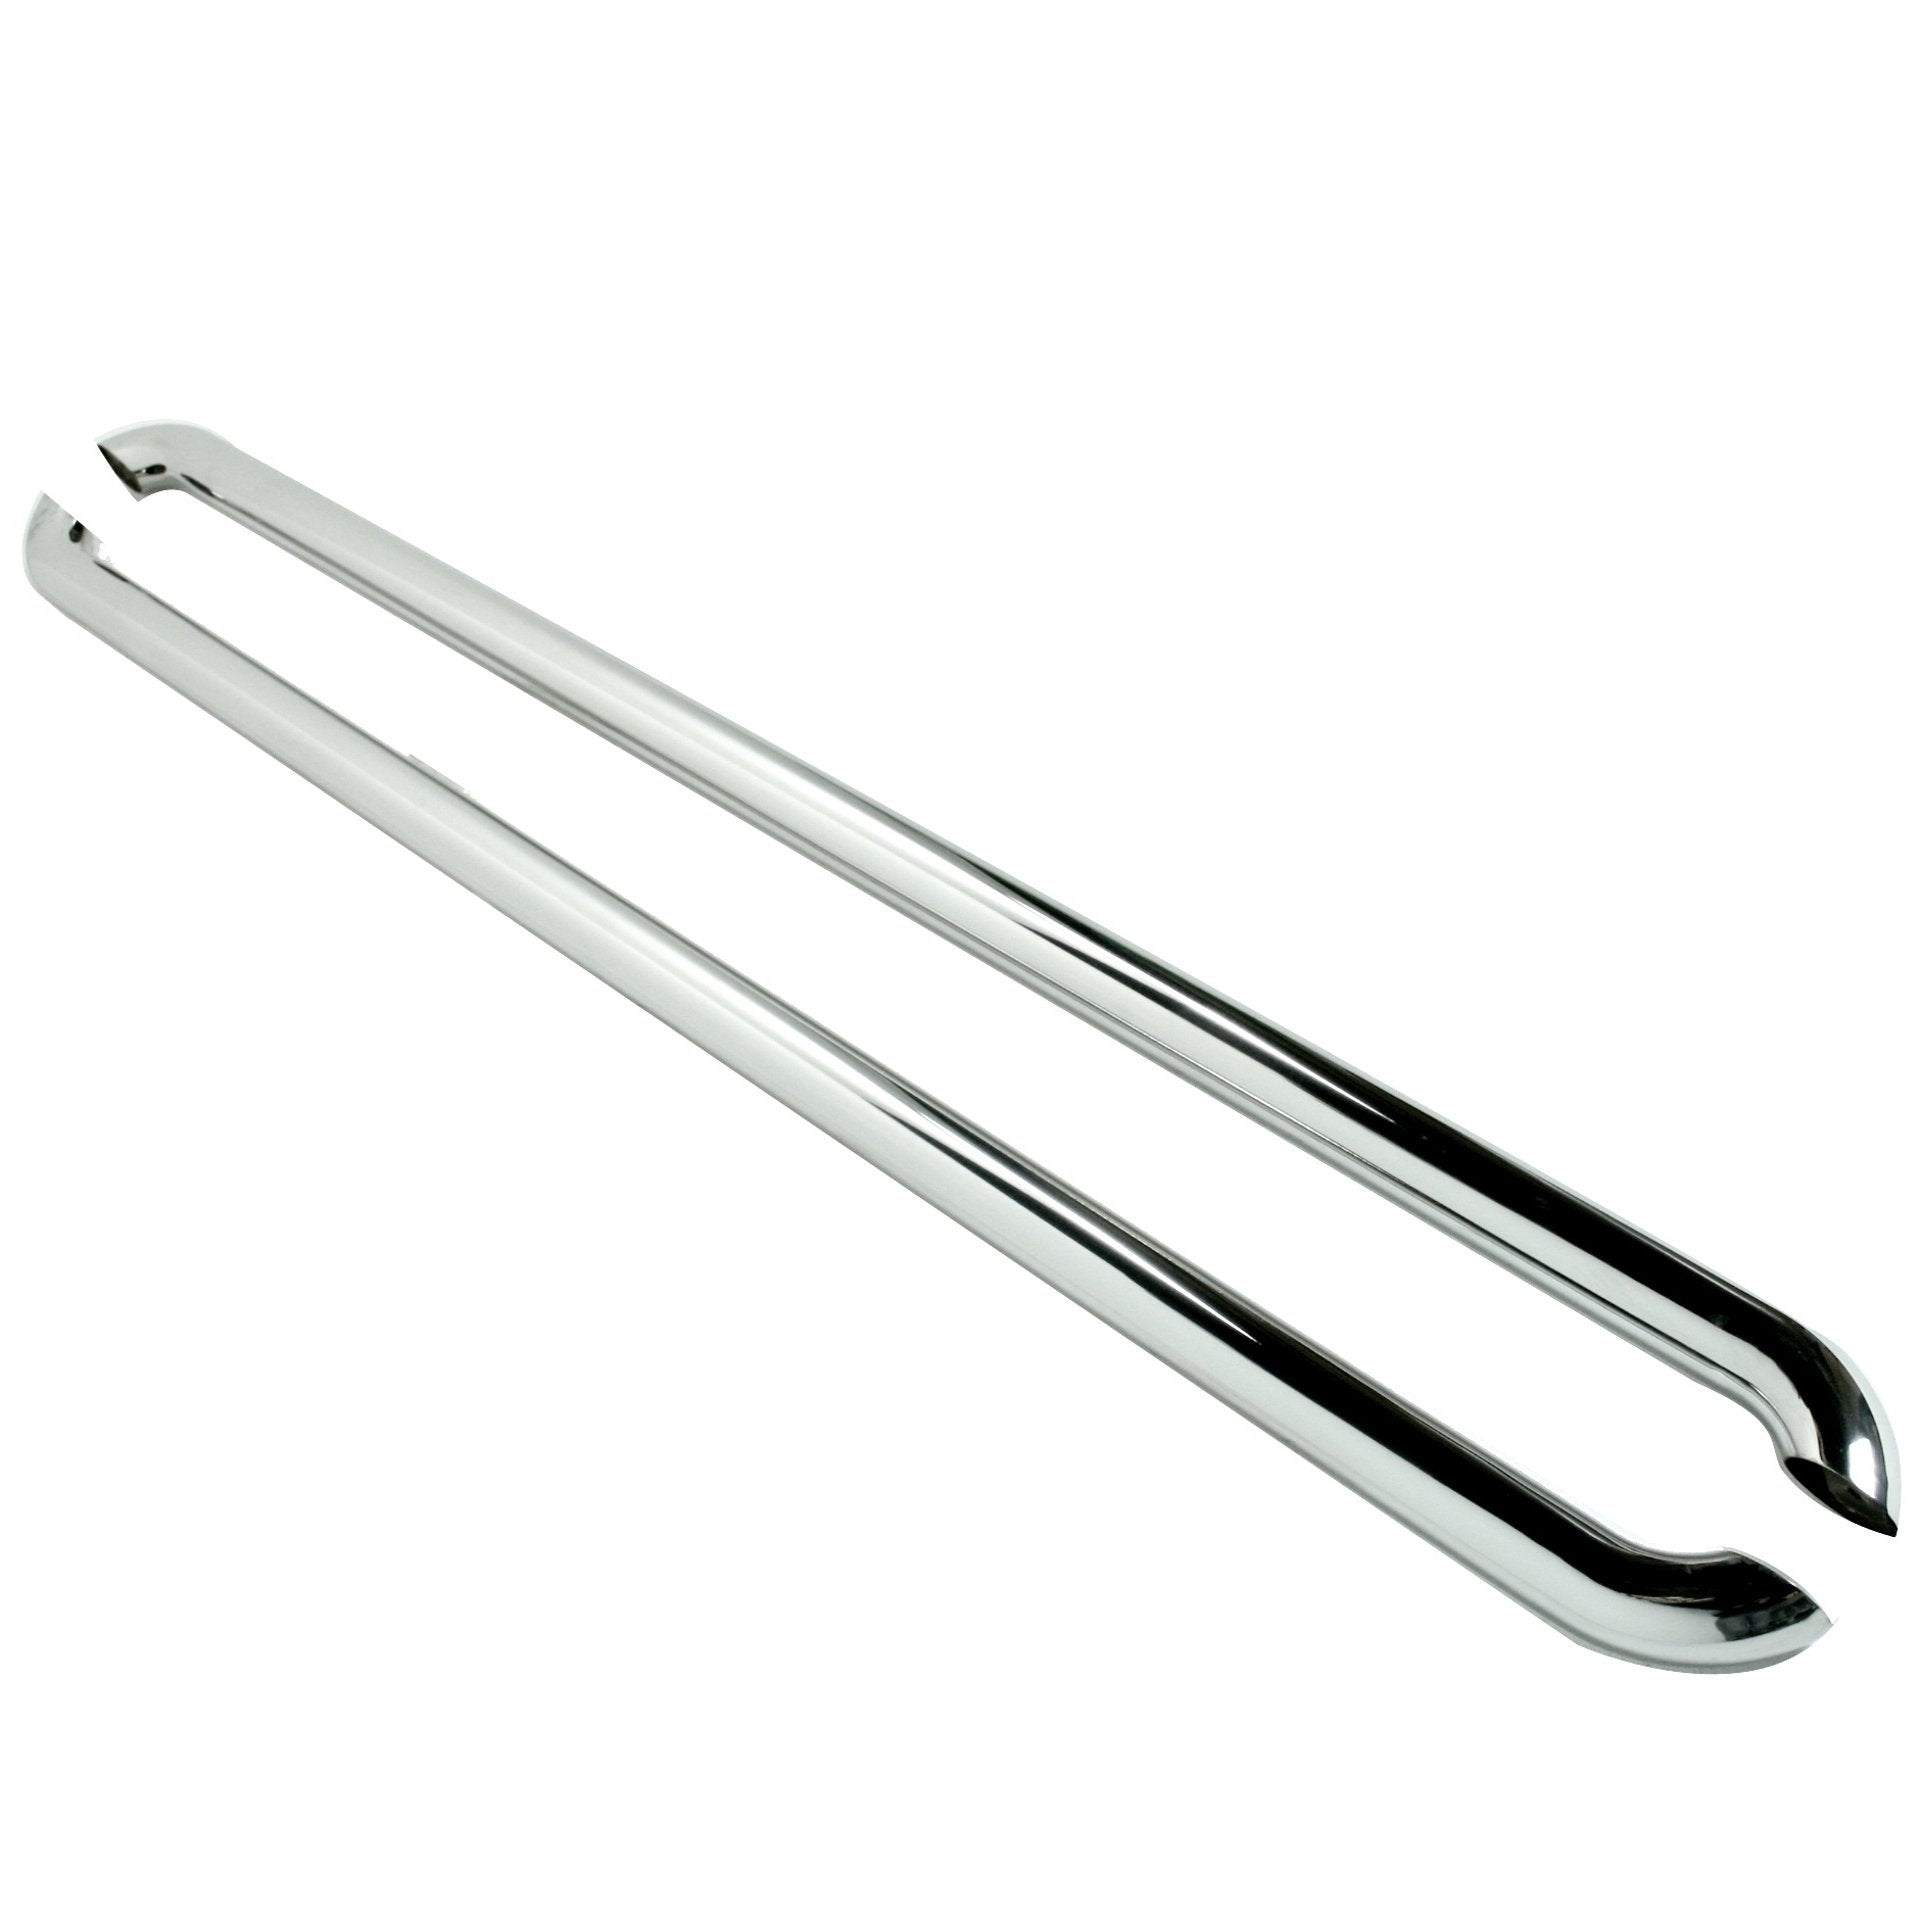 OE Style Stainless Steel Side Bars for Volkswagen Transporter T6 LWB -  - sold by Direct4x4